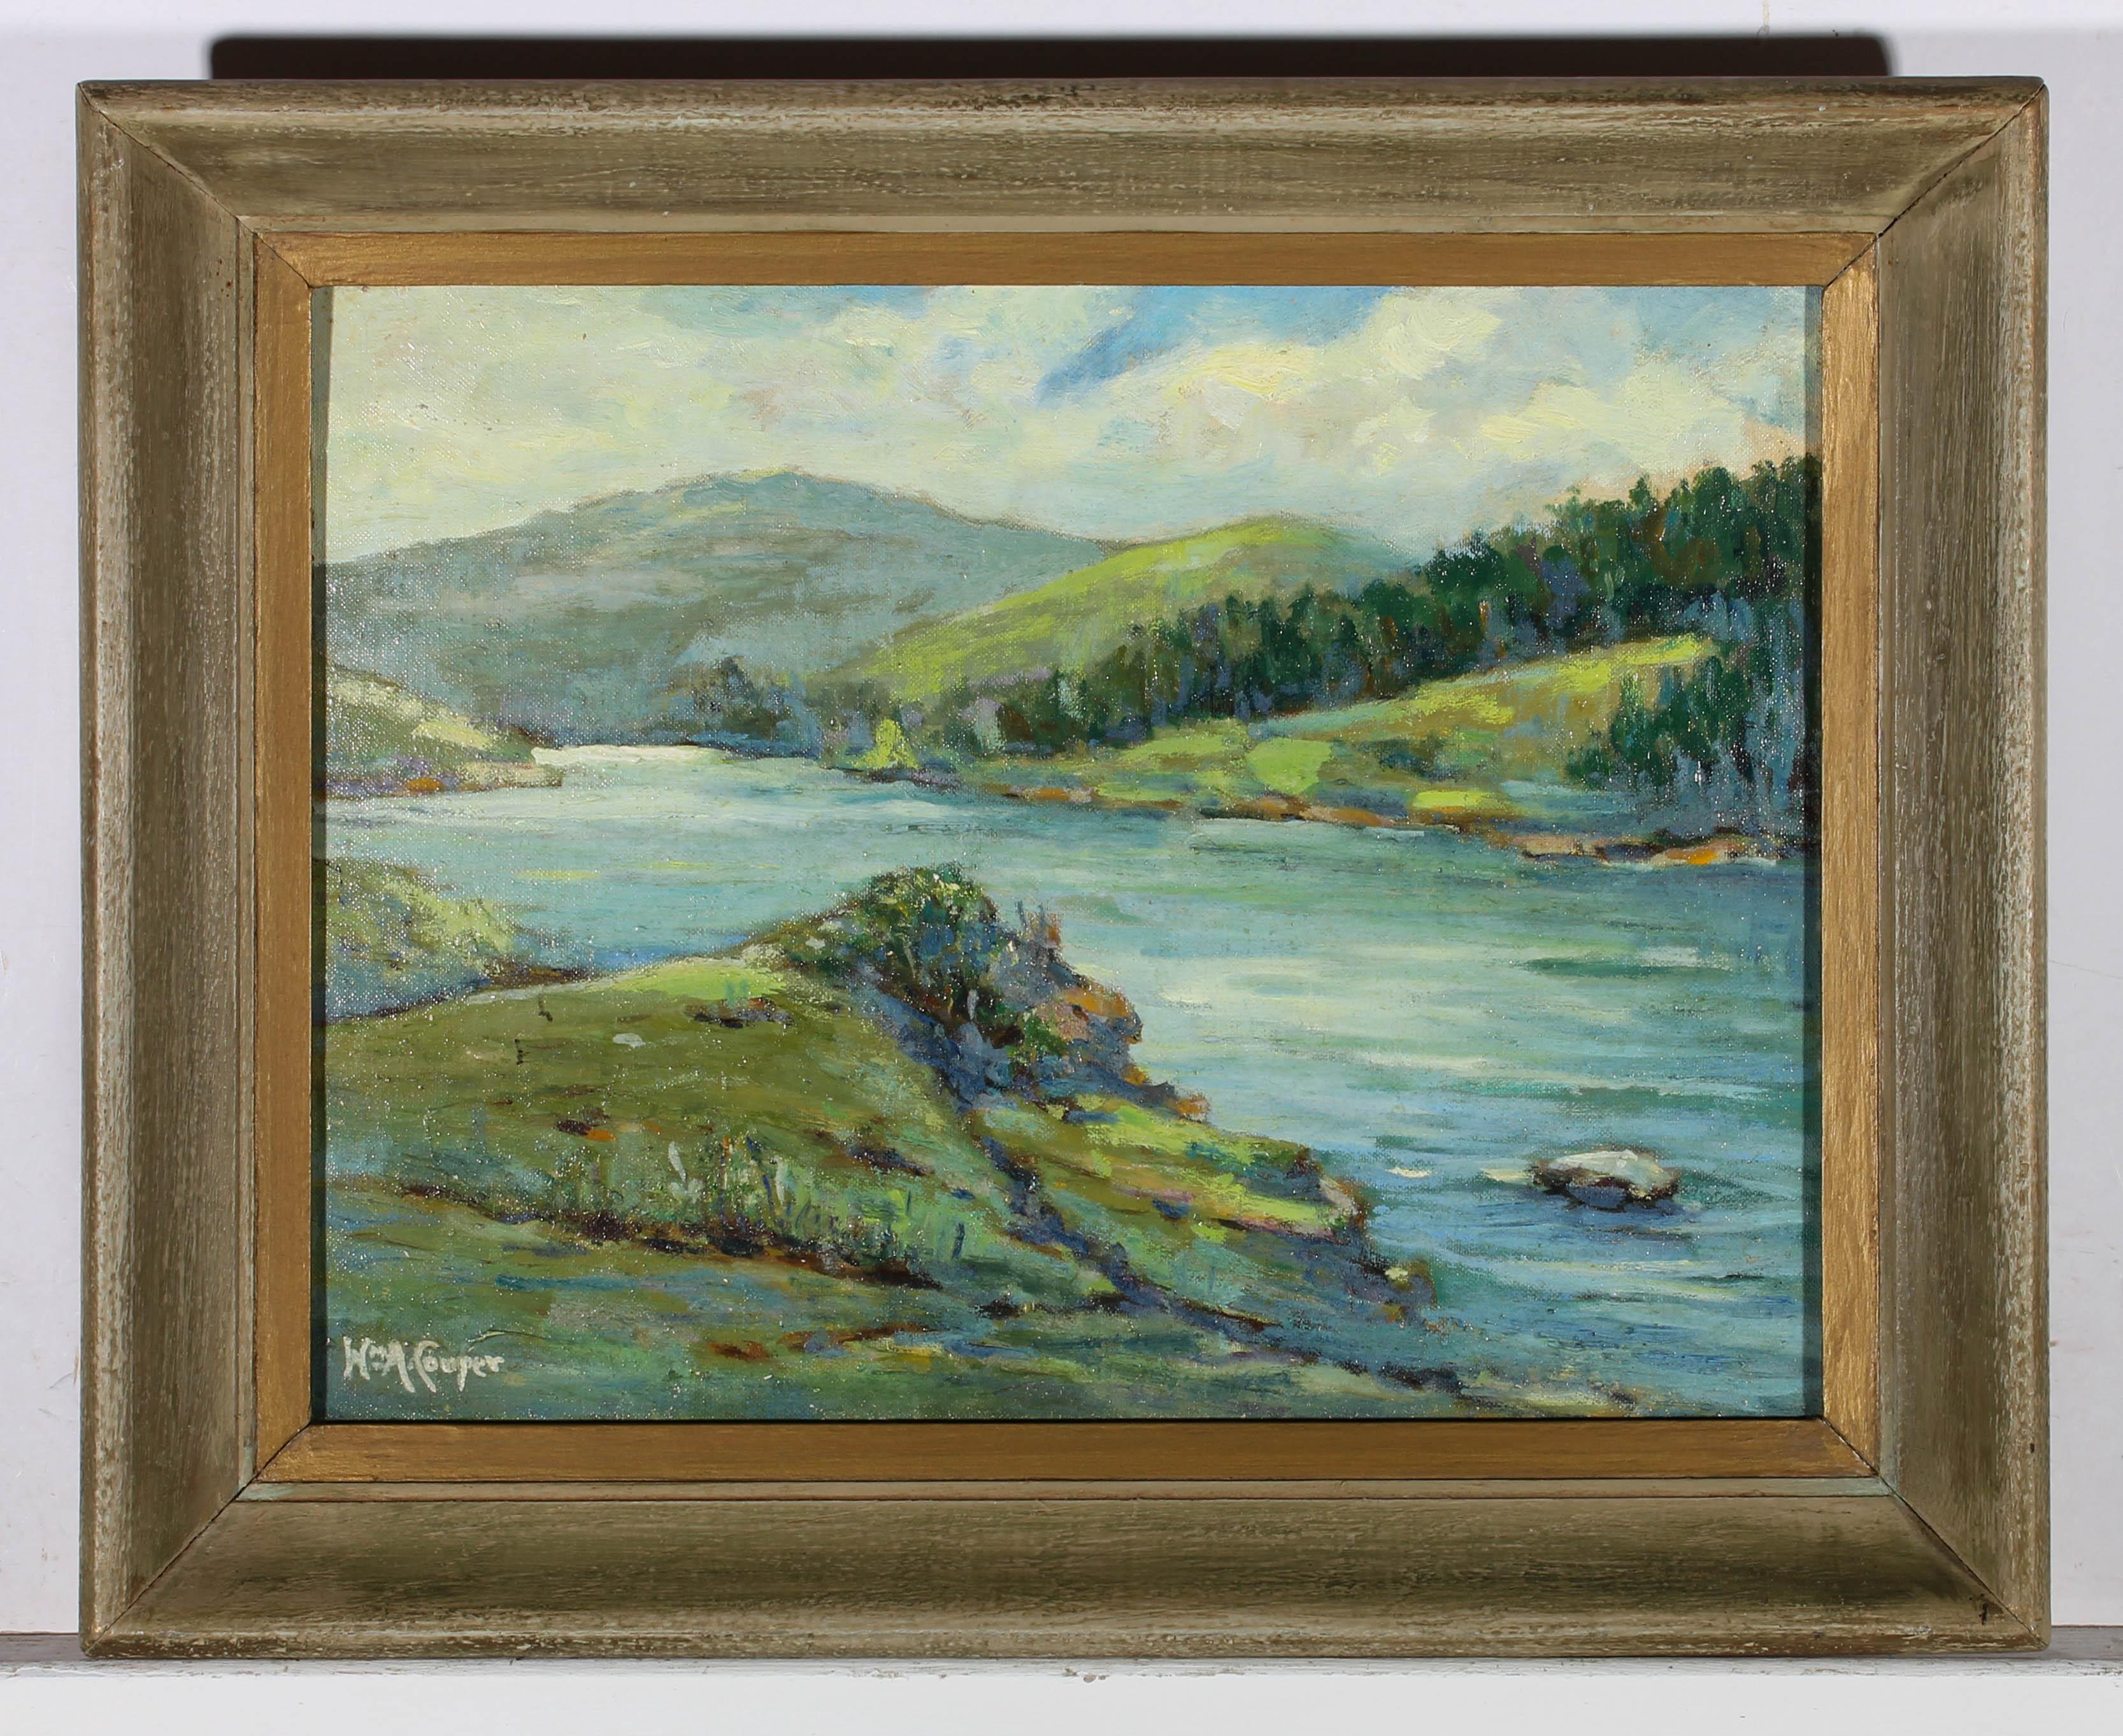 William Alan Couper (1891-1972) - Framed Early 20th Century Oil, Upland River 1